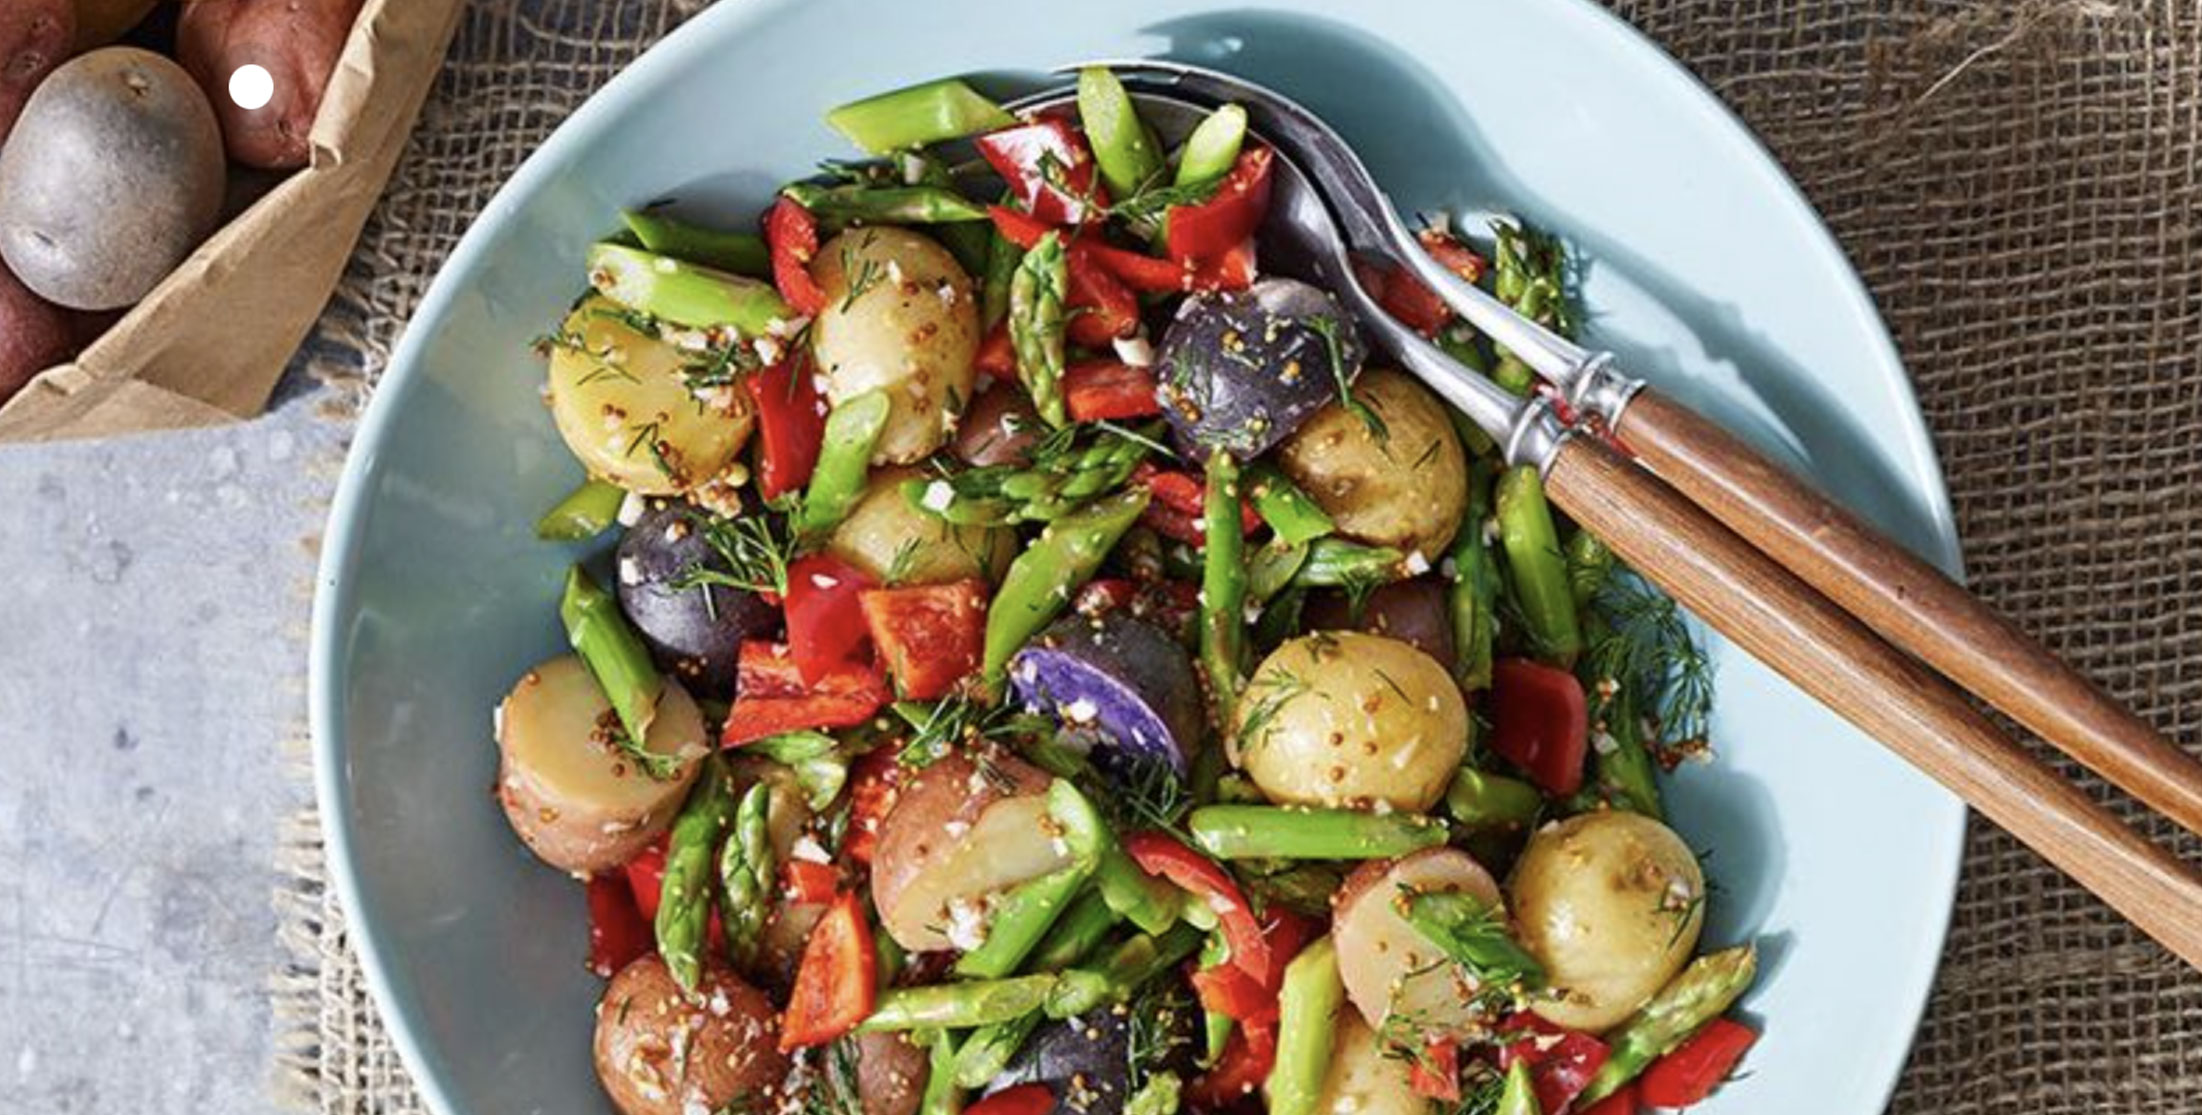 Potato Salad with Prime Time Asparagus and Red Pepper